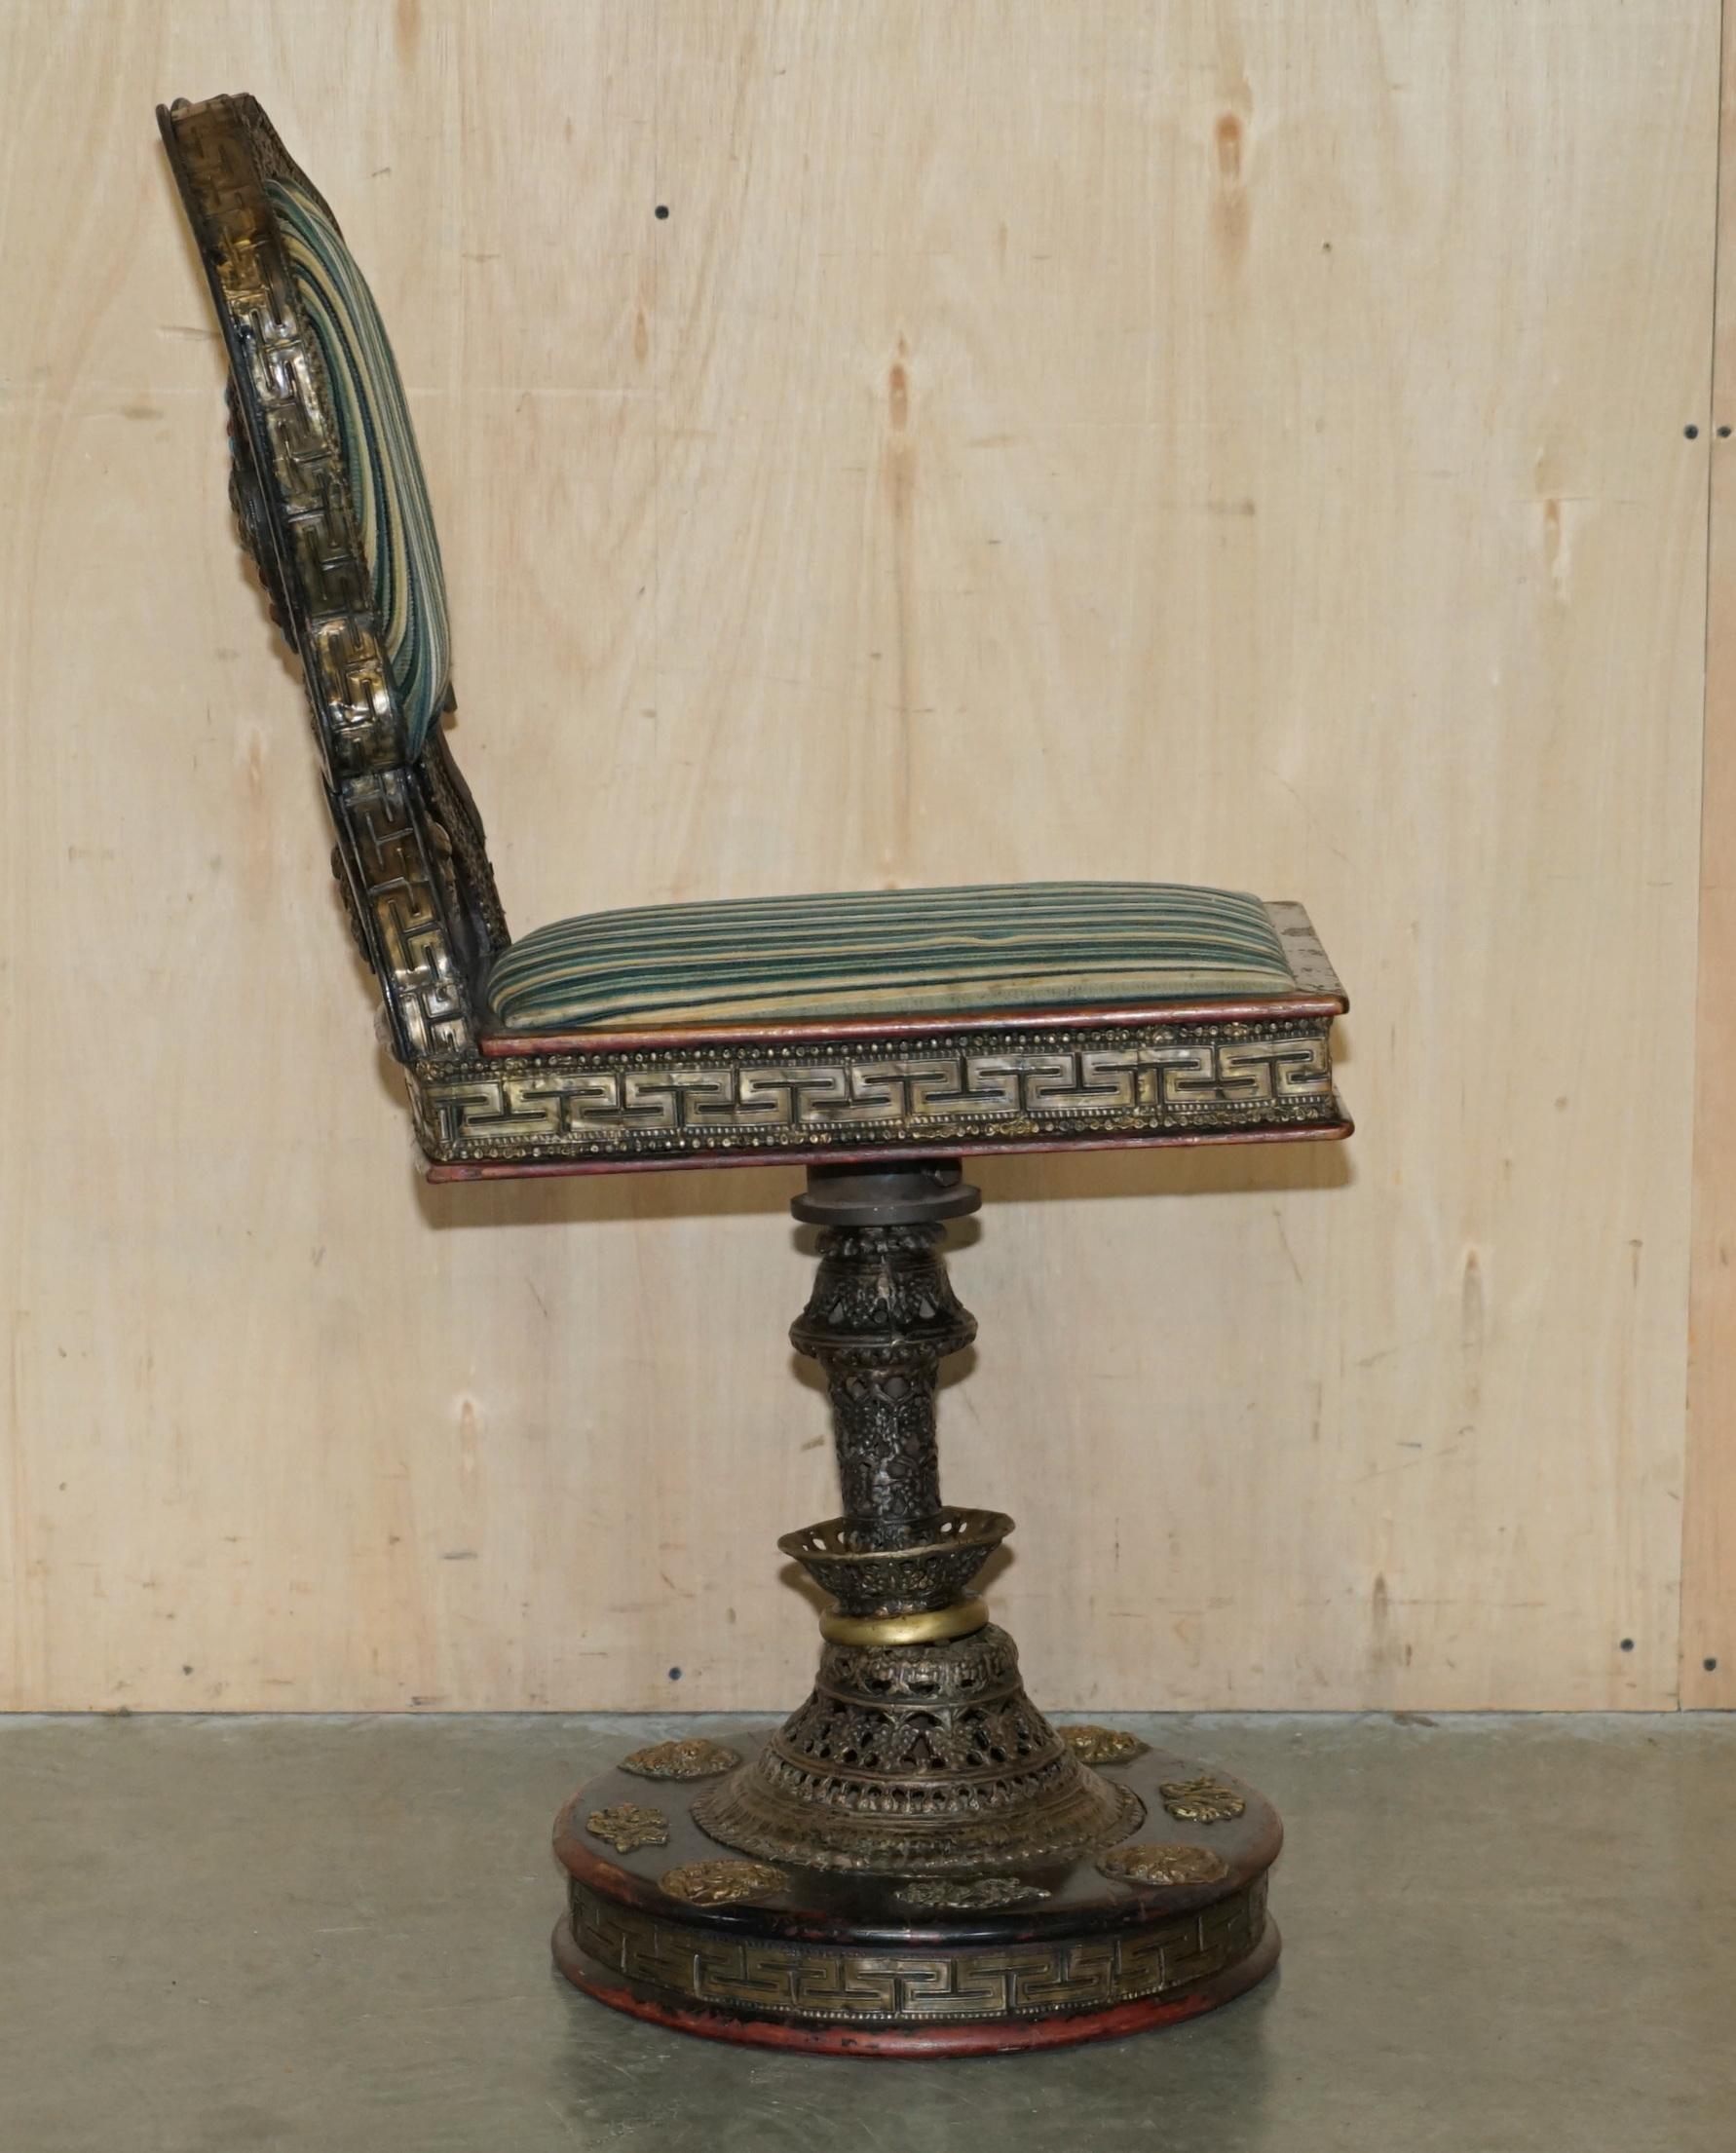 VERY RARE ANTIQUE CiRCA 1880 REPOUSE CHINESE DRAGON GEM ENCRUSTED CAPTAINS CHAIR For Sale 8